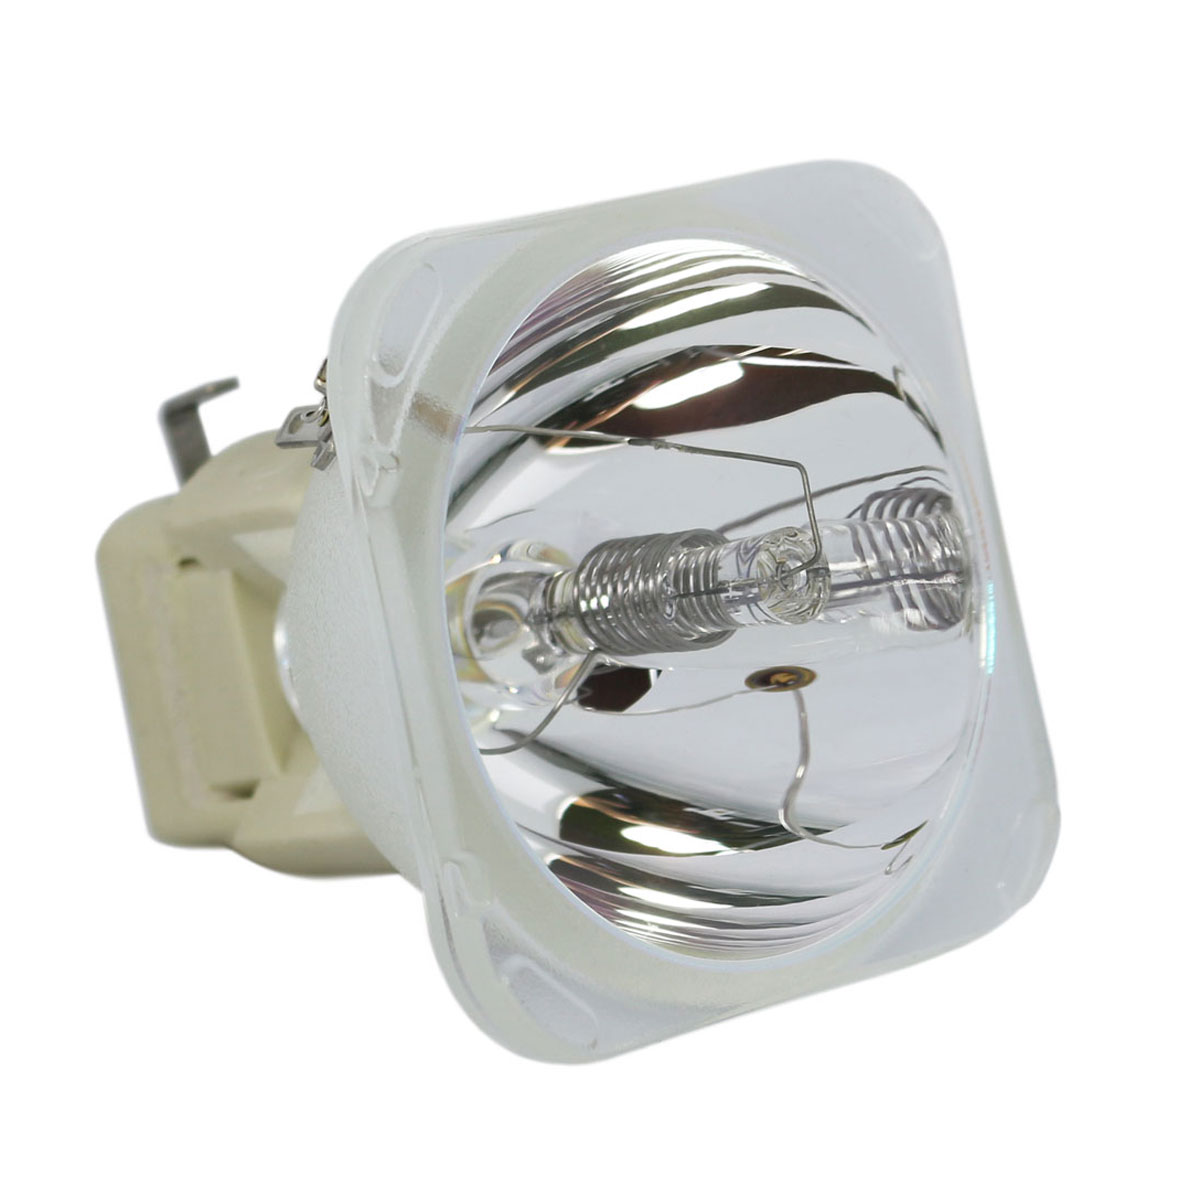 Original Osram Projector Lamp Replacement for BenQ 5J.J4R05.001 (Bulb Only) - image 2 of 6